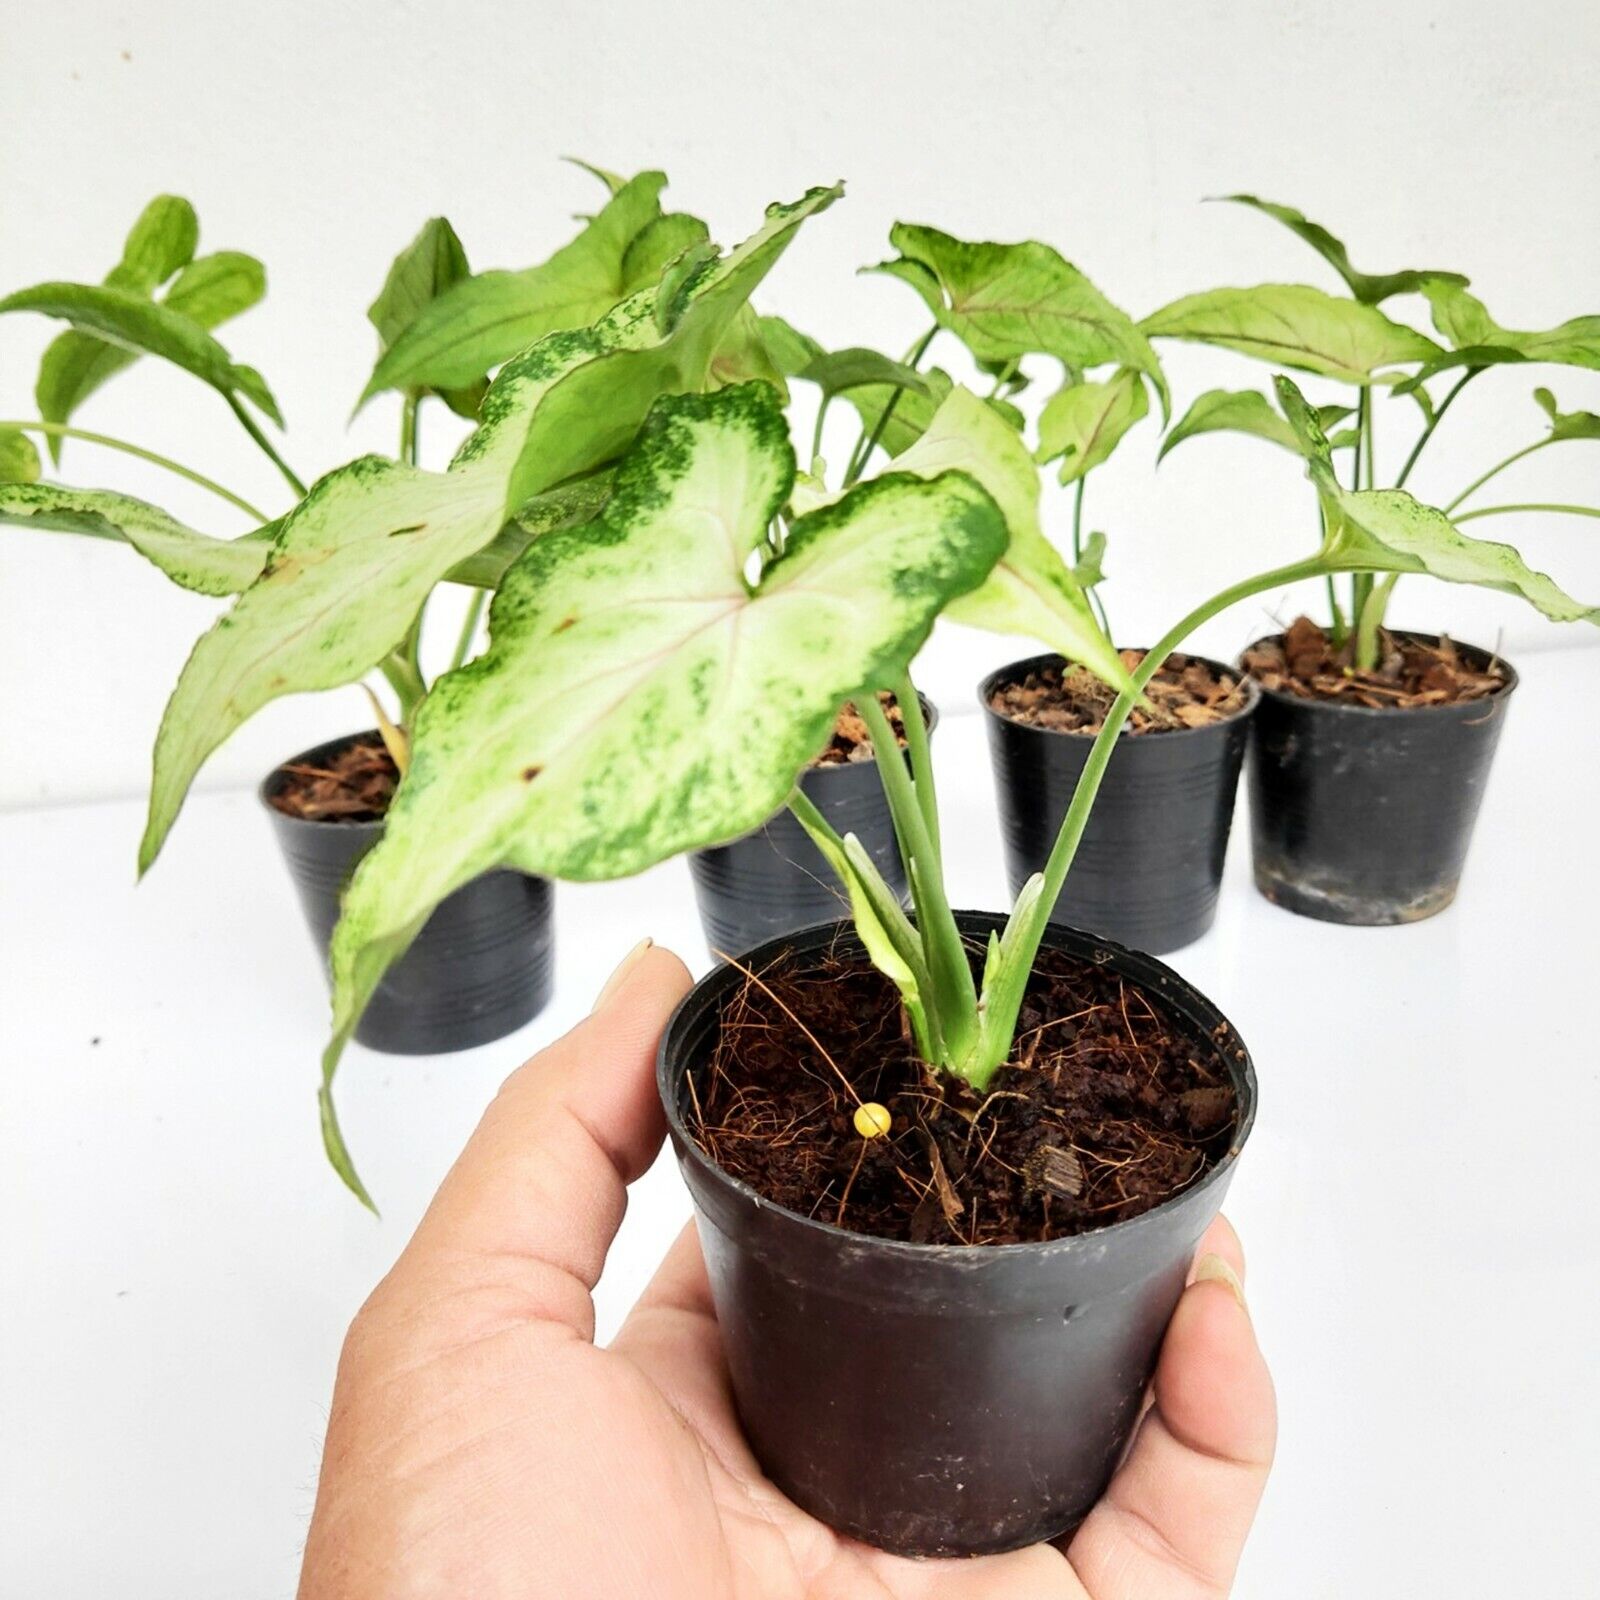 Set of 5 Nice Plant Syngonium Orm Manee Mutation Tropical Rooted Houseplant Rare Unbranded - фотография #8